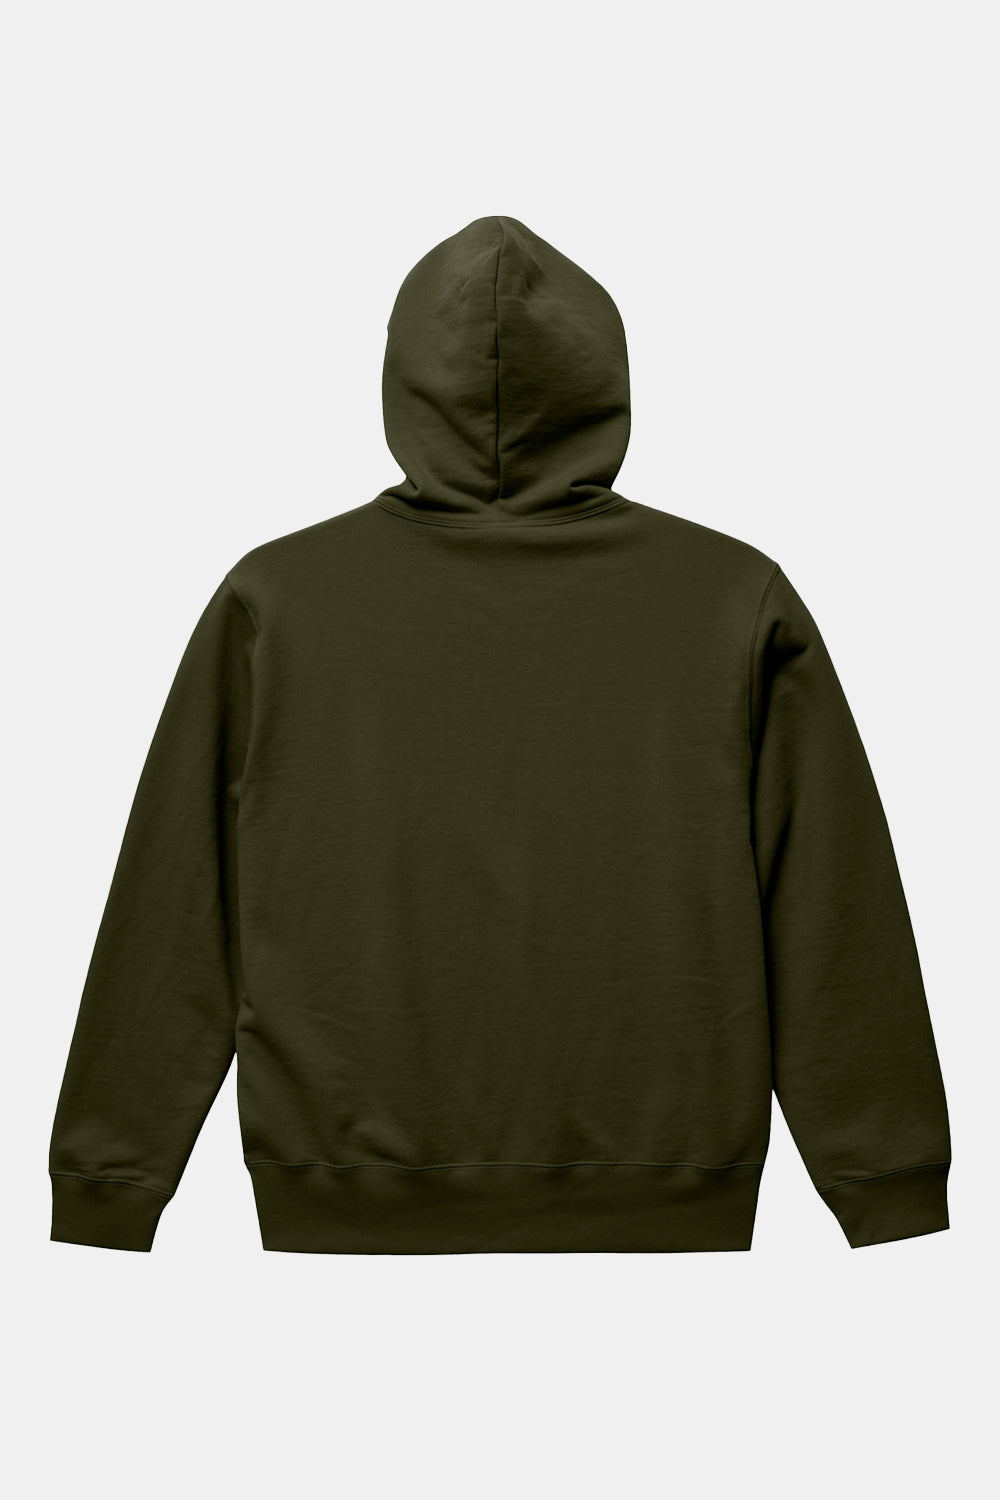 United Athle 5214 10.0oz Sweat Pullover Hoodie (Olive)
